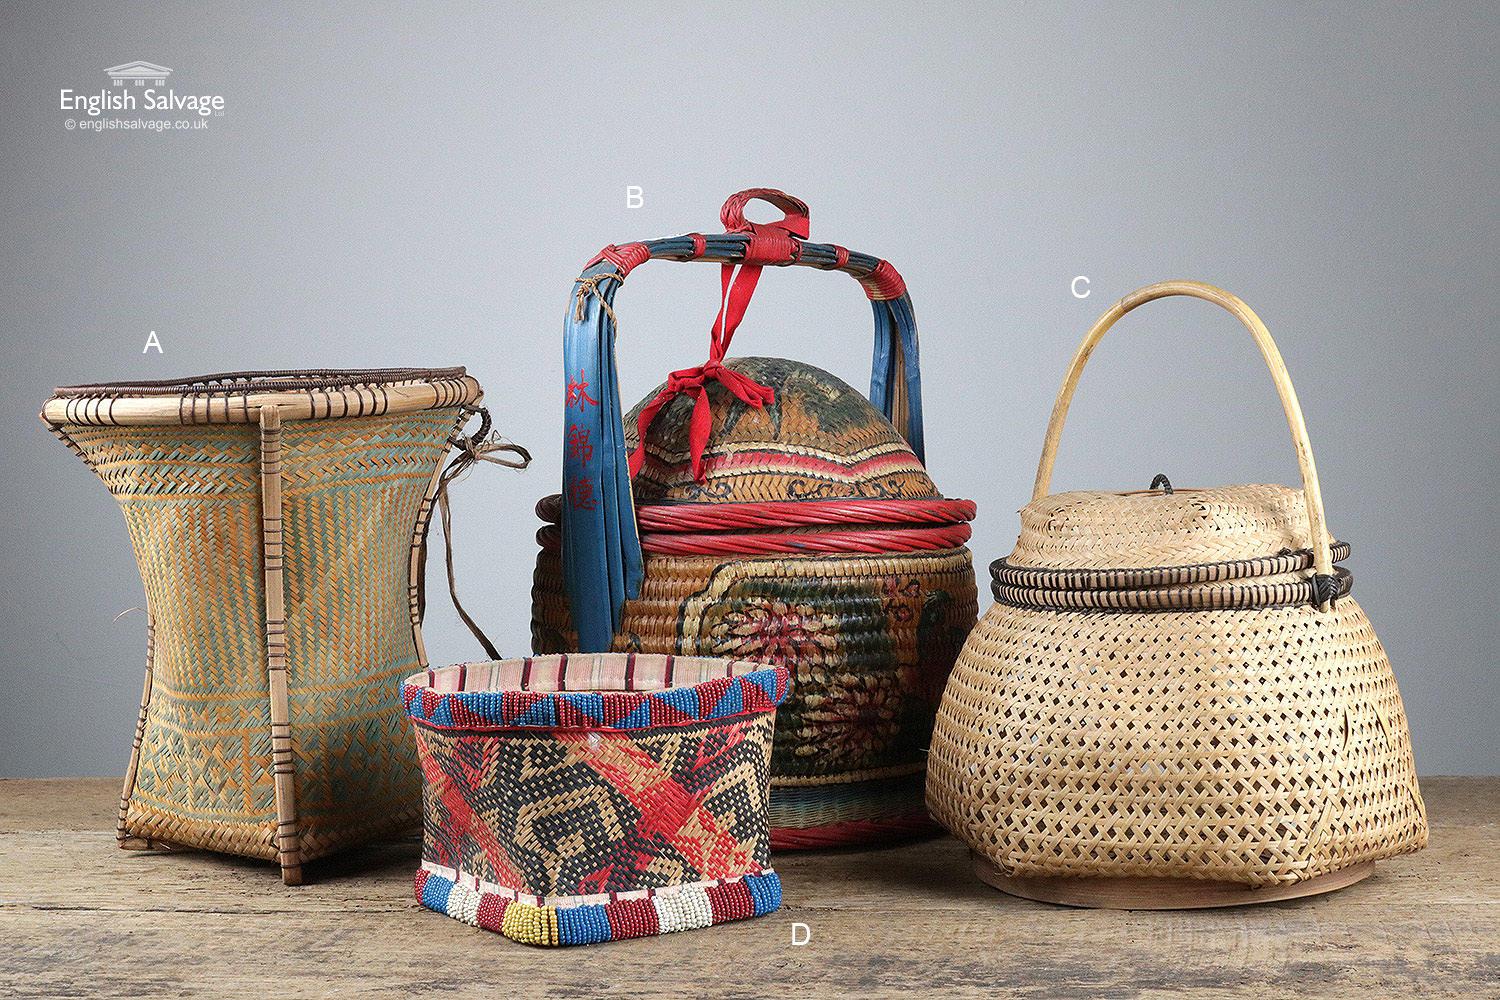 Salvaged original Chinese woven wicker baskets. A is 24 cm diameter x 26 cm high. B is 30 cm wide, 27 cm diameter at the bottom x 39 cm high. C is 28 cm wide x 32 cm high x 25 cm deep. D is 19 cm wide x 12 cm high x 14 cm deep. Wear to all from past